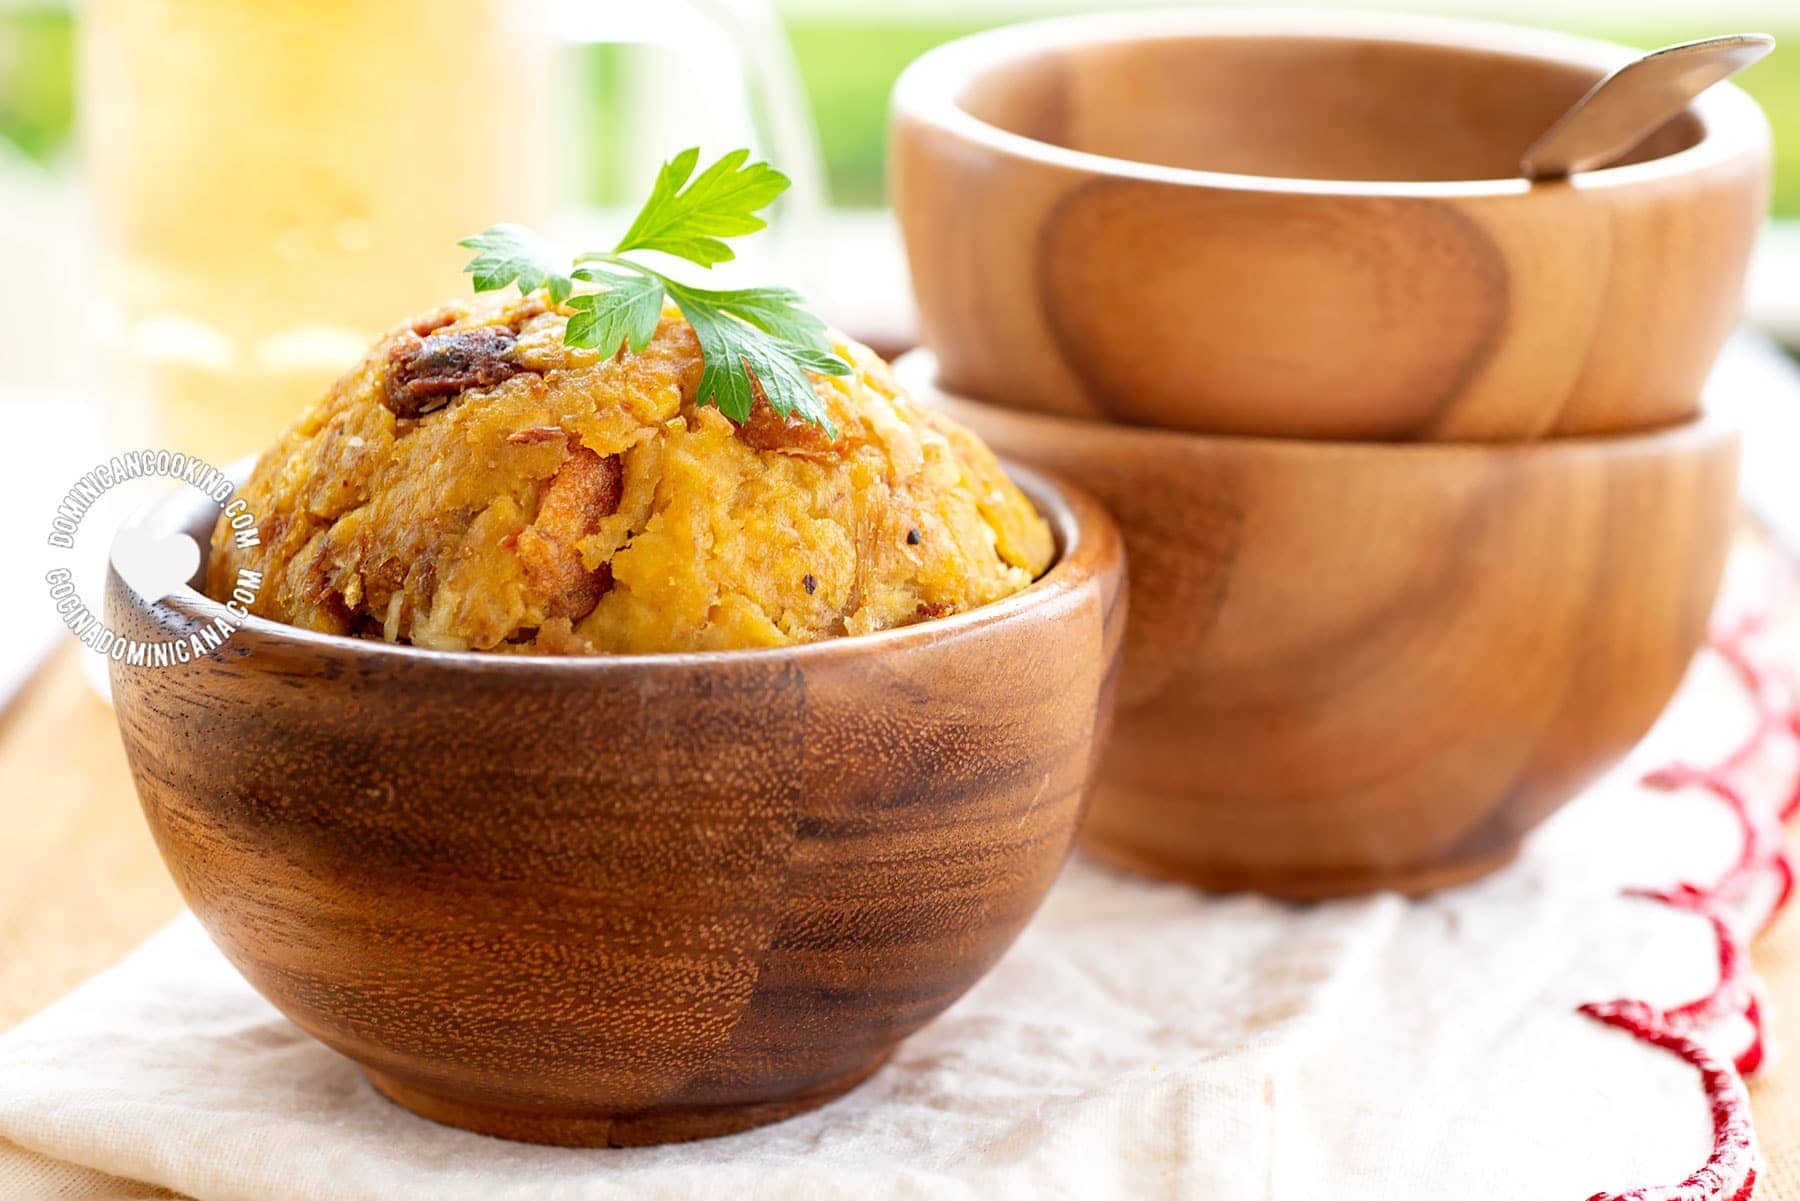 Bowl of fried mofongo with a bowl of broth.